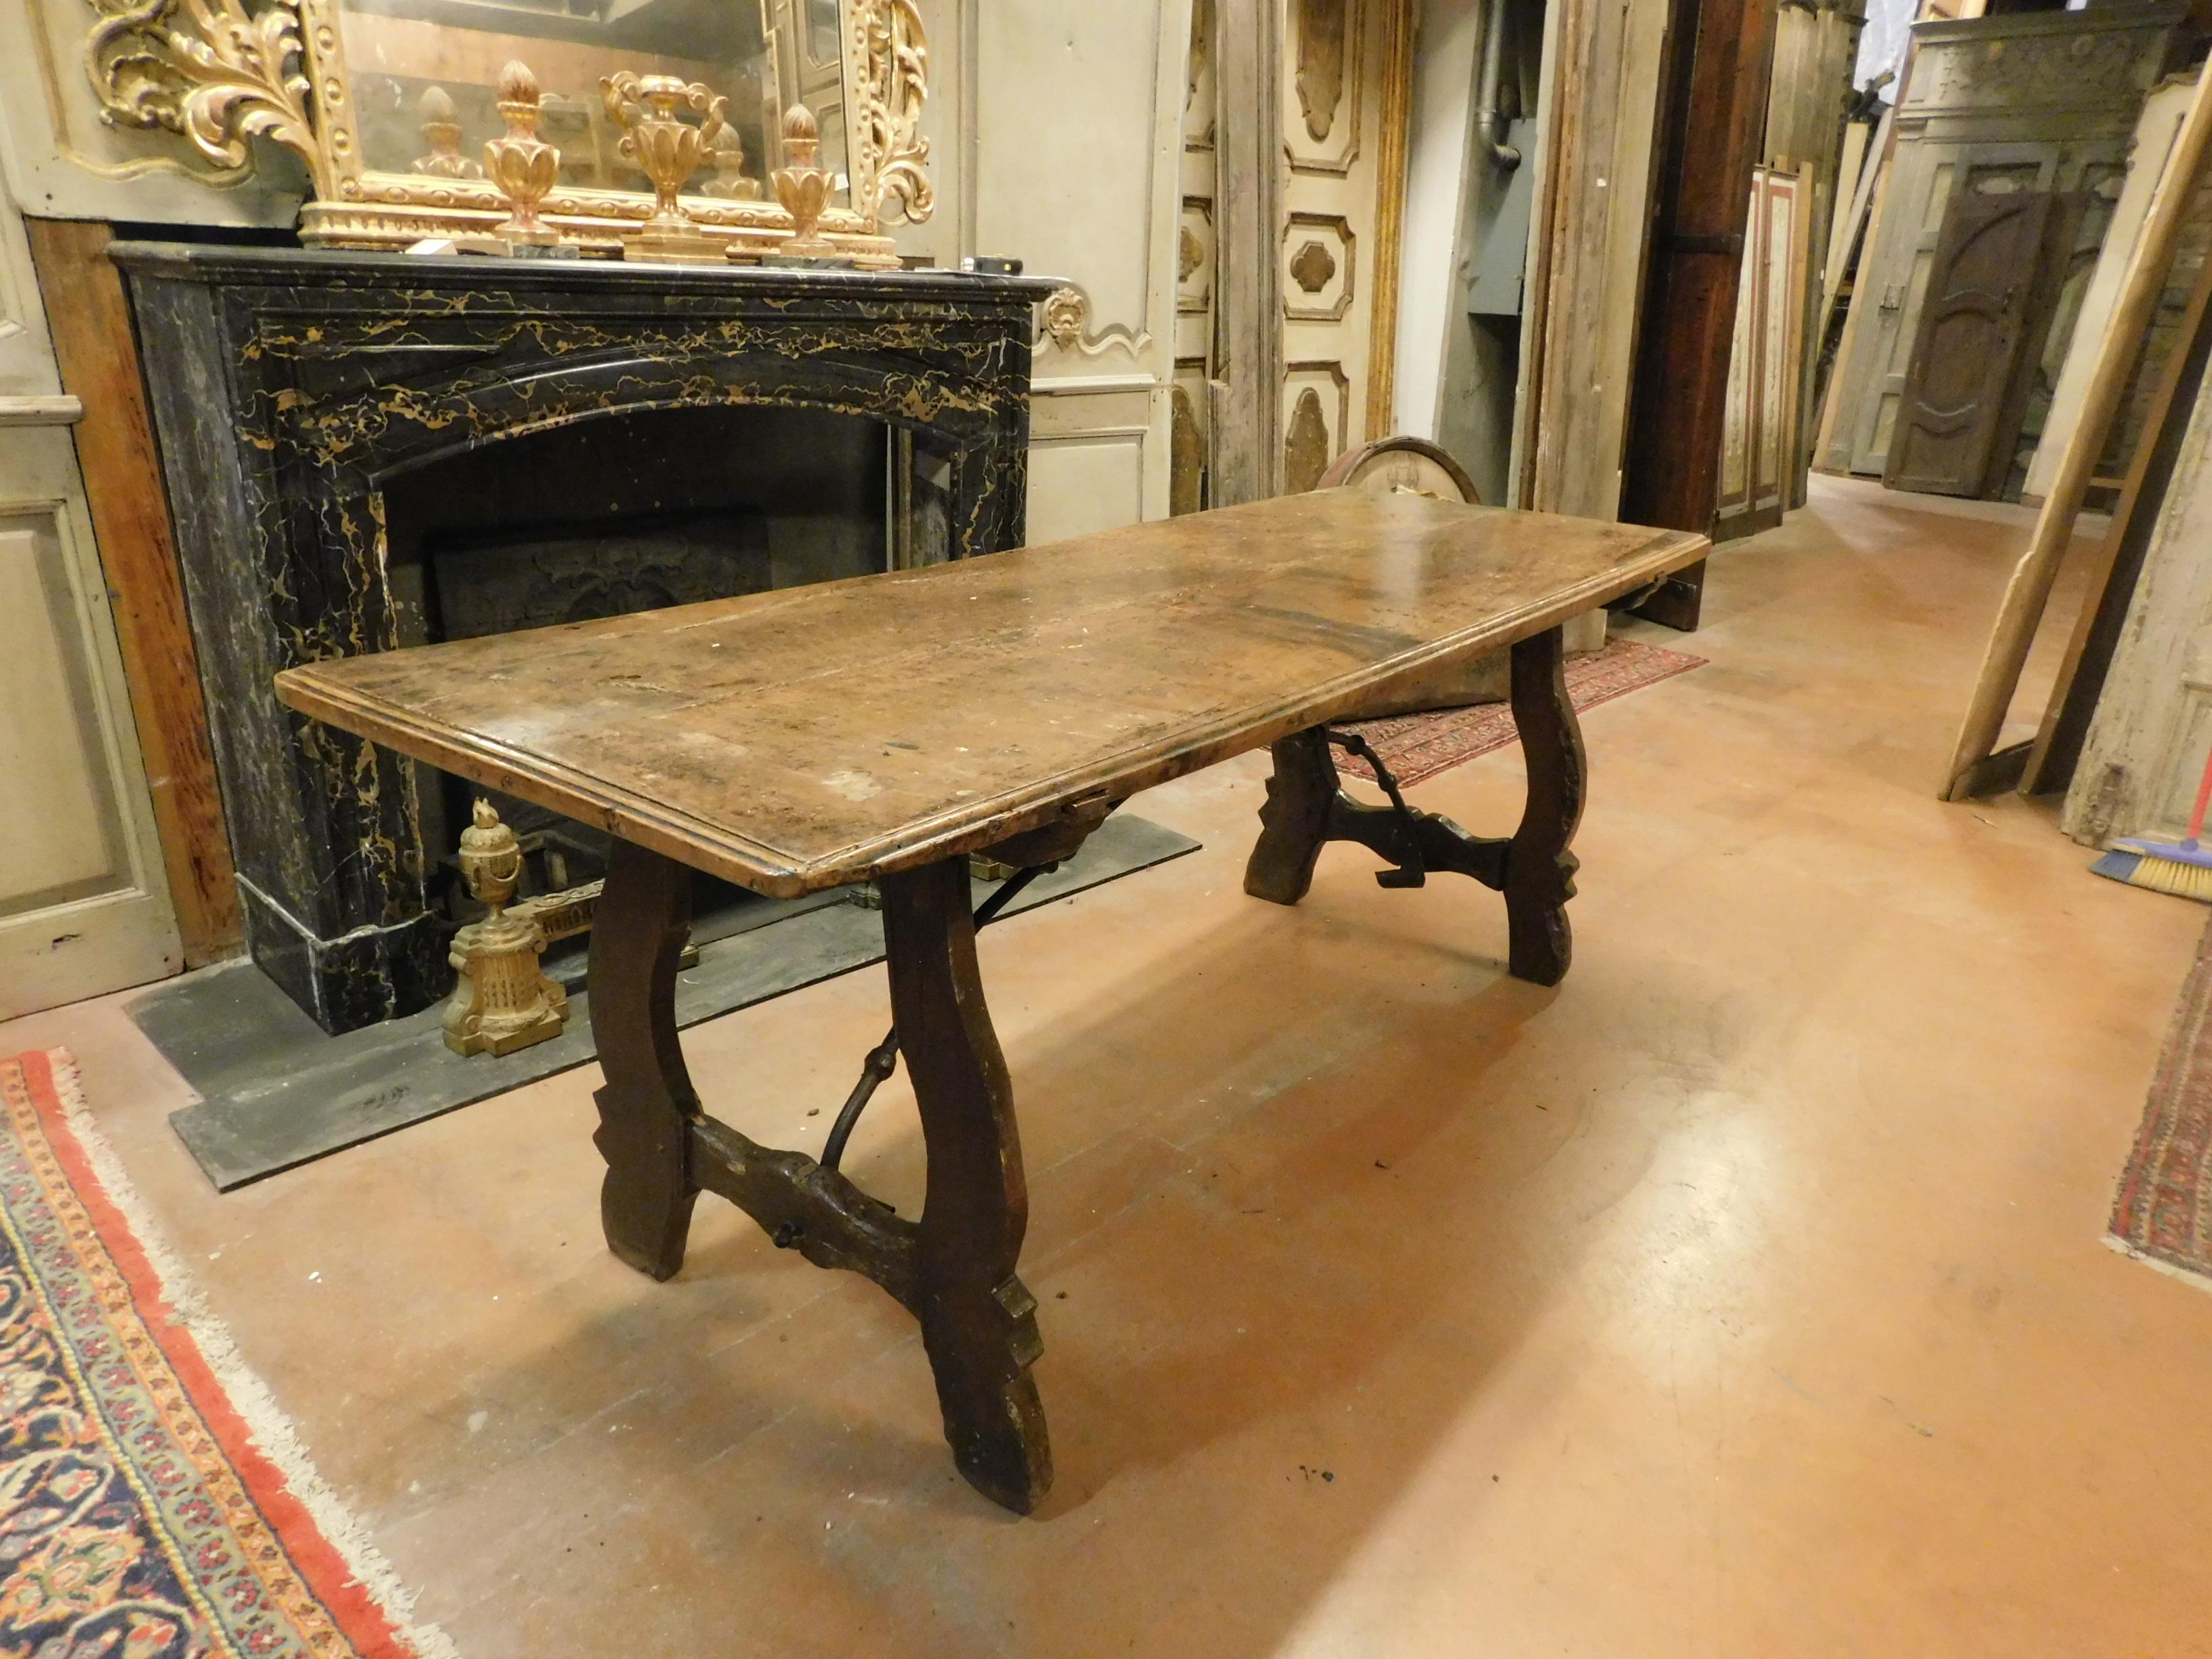 Spanish Antique Refectory Table in Walnut, Original Irons, 18th Century Spain